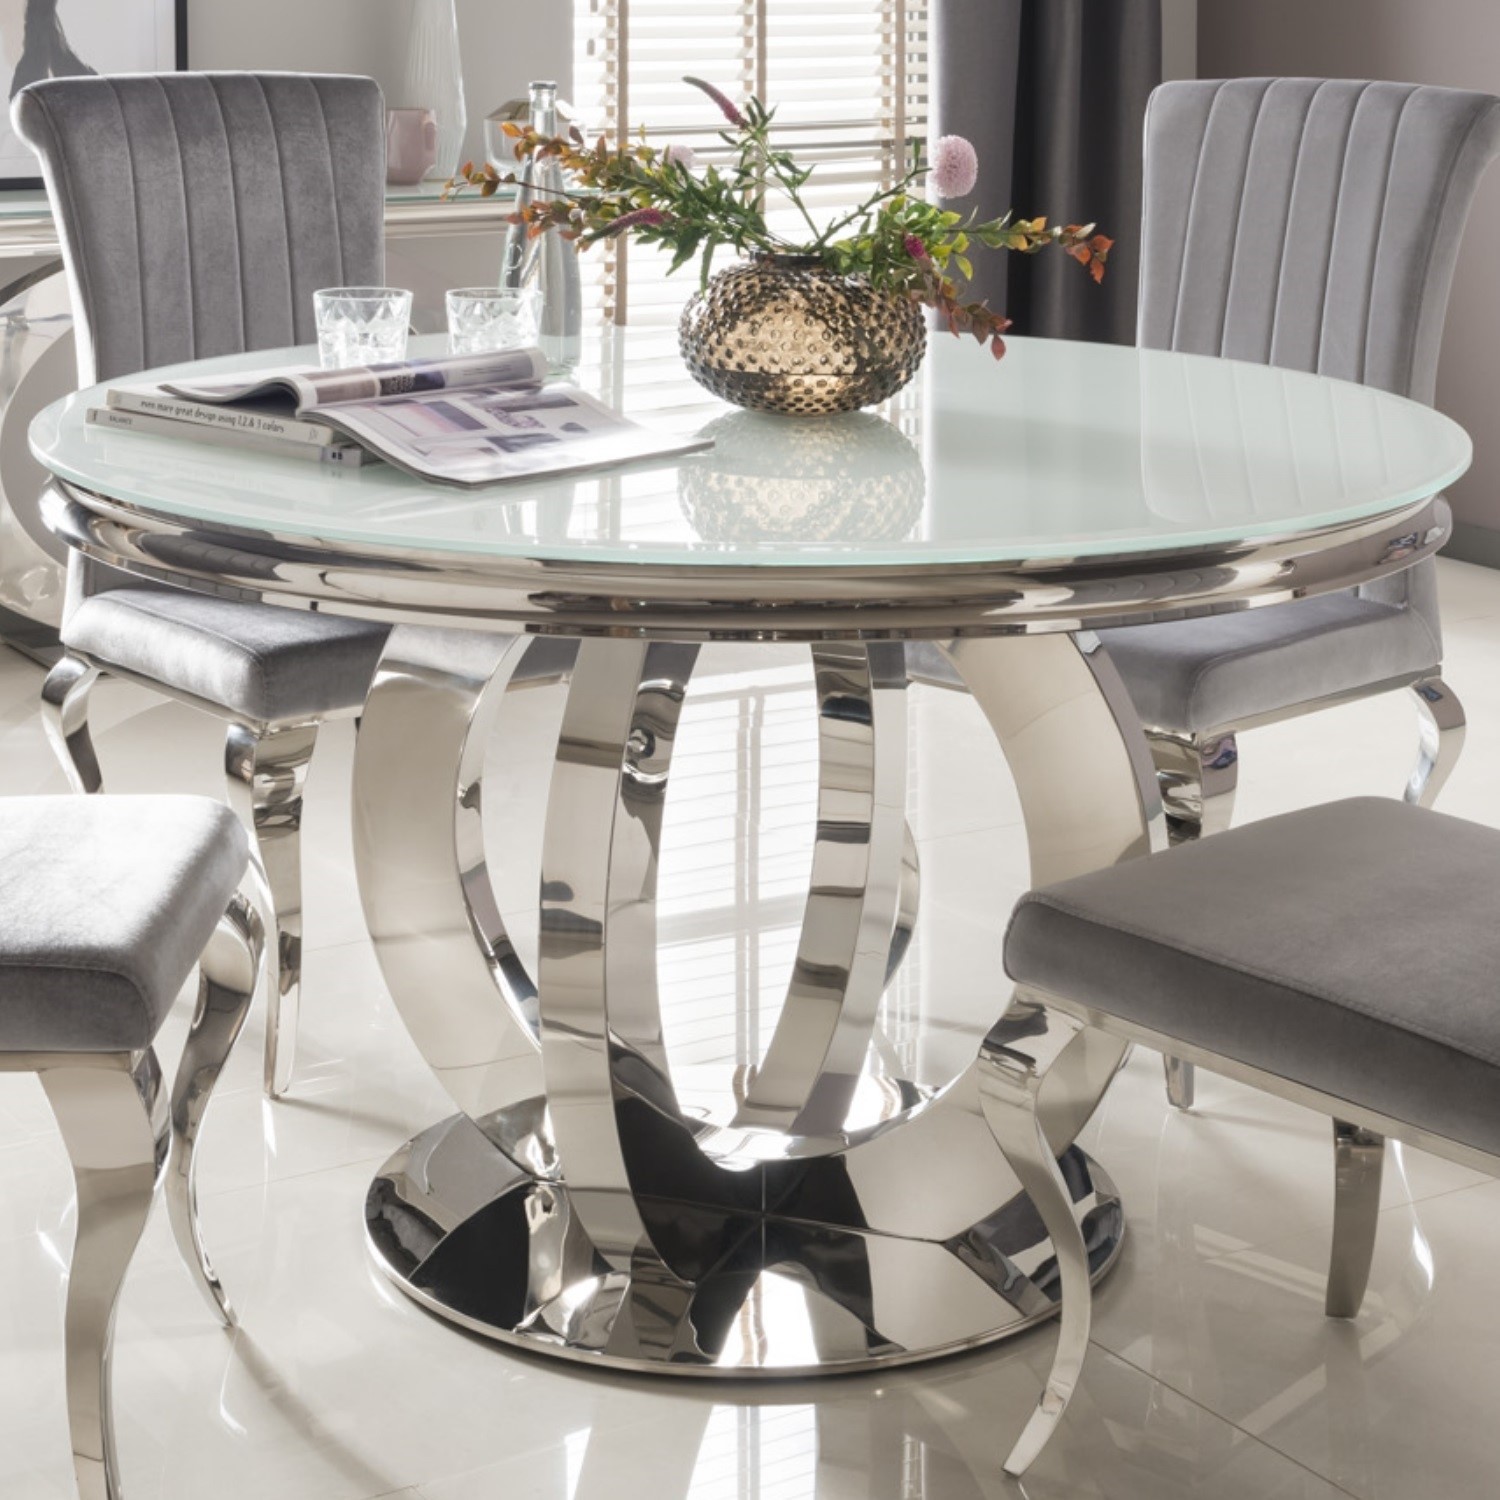 Orion Mirrored Round Dining Table With White Glass Top Vida Living Furniture123